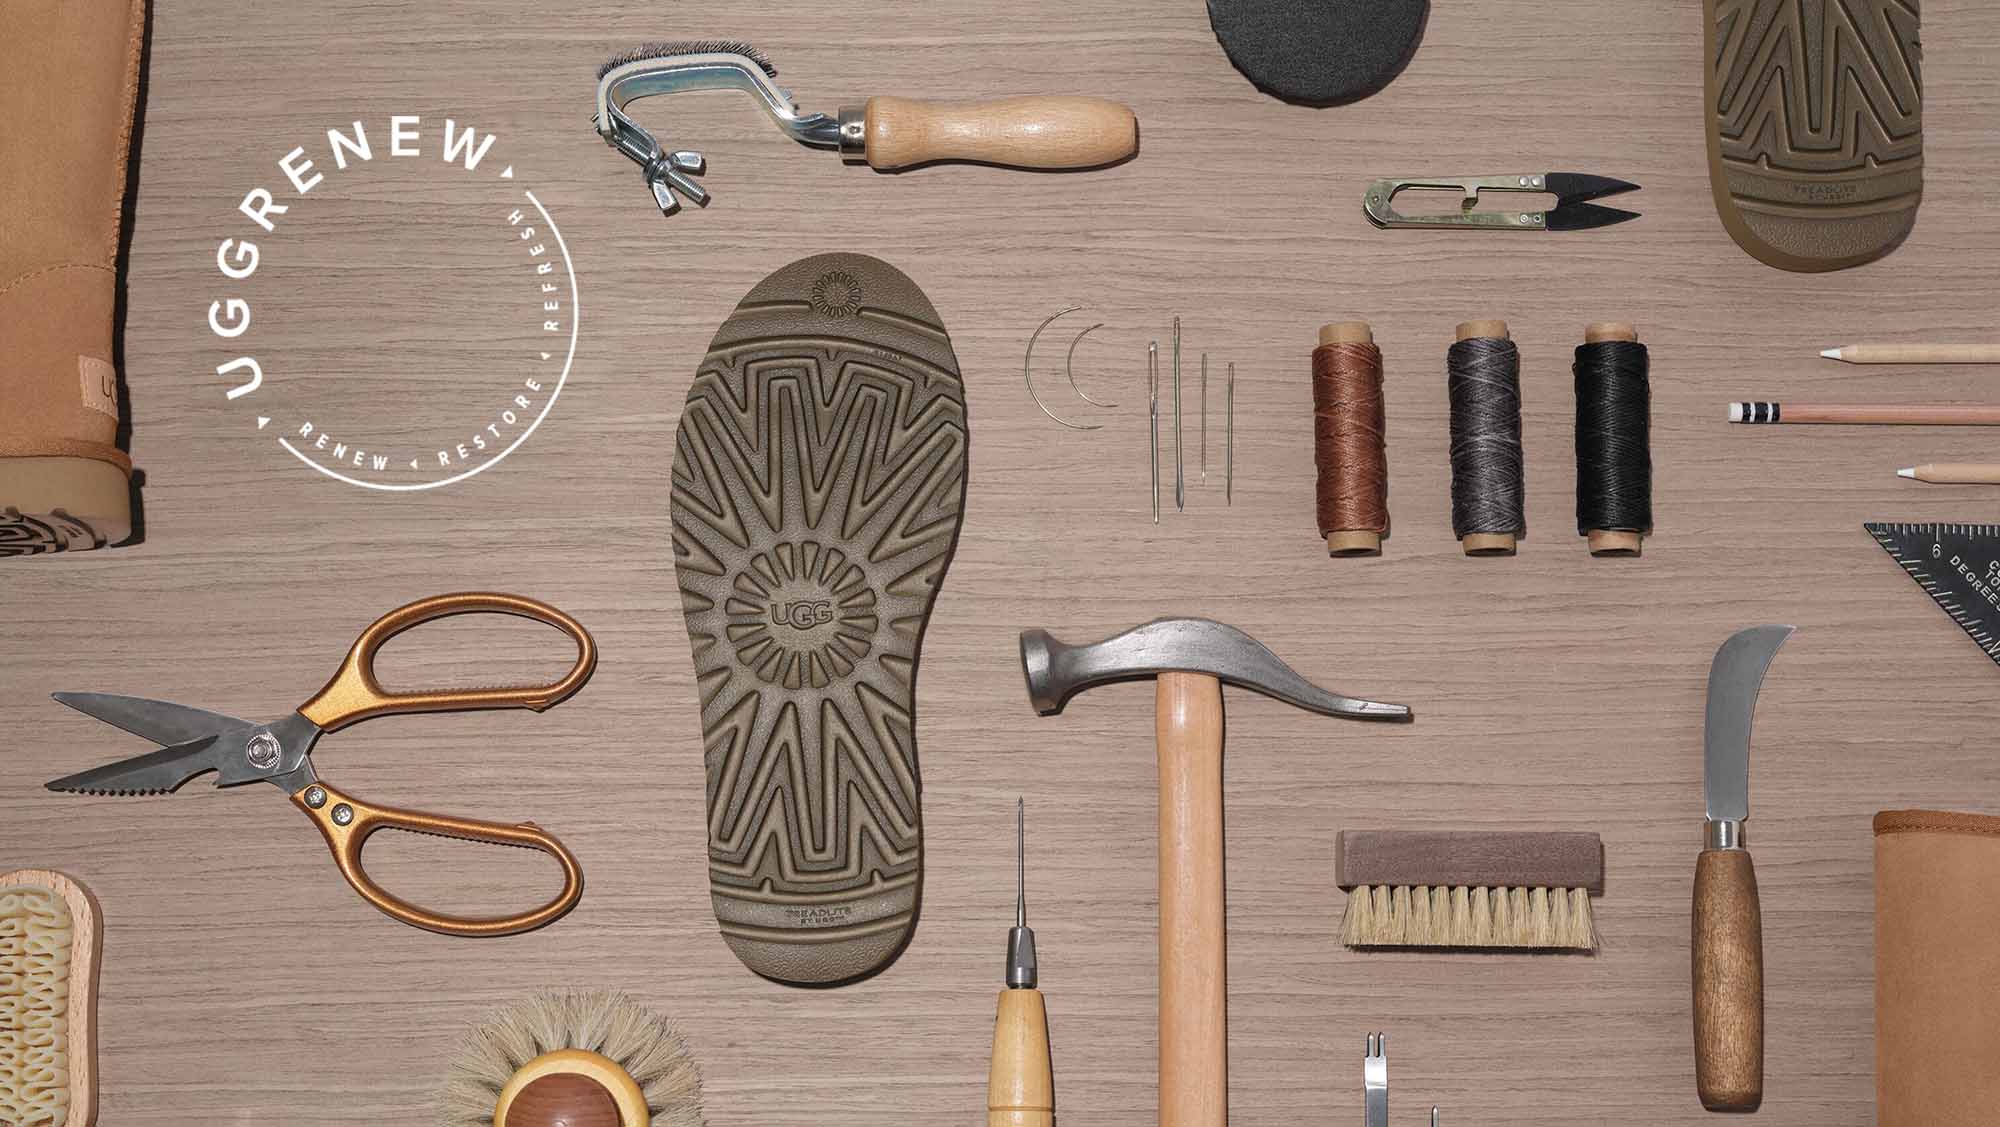 Collection of shoe repair materials on a table with the UGG Renew logo.